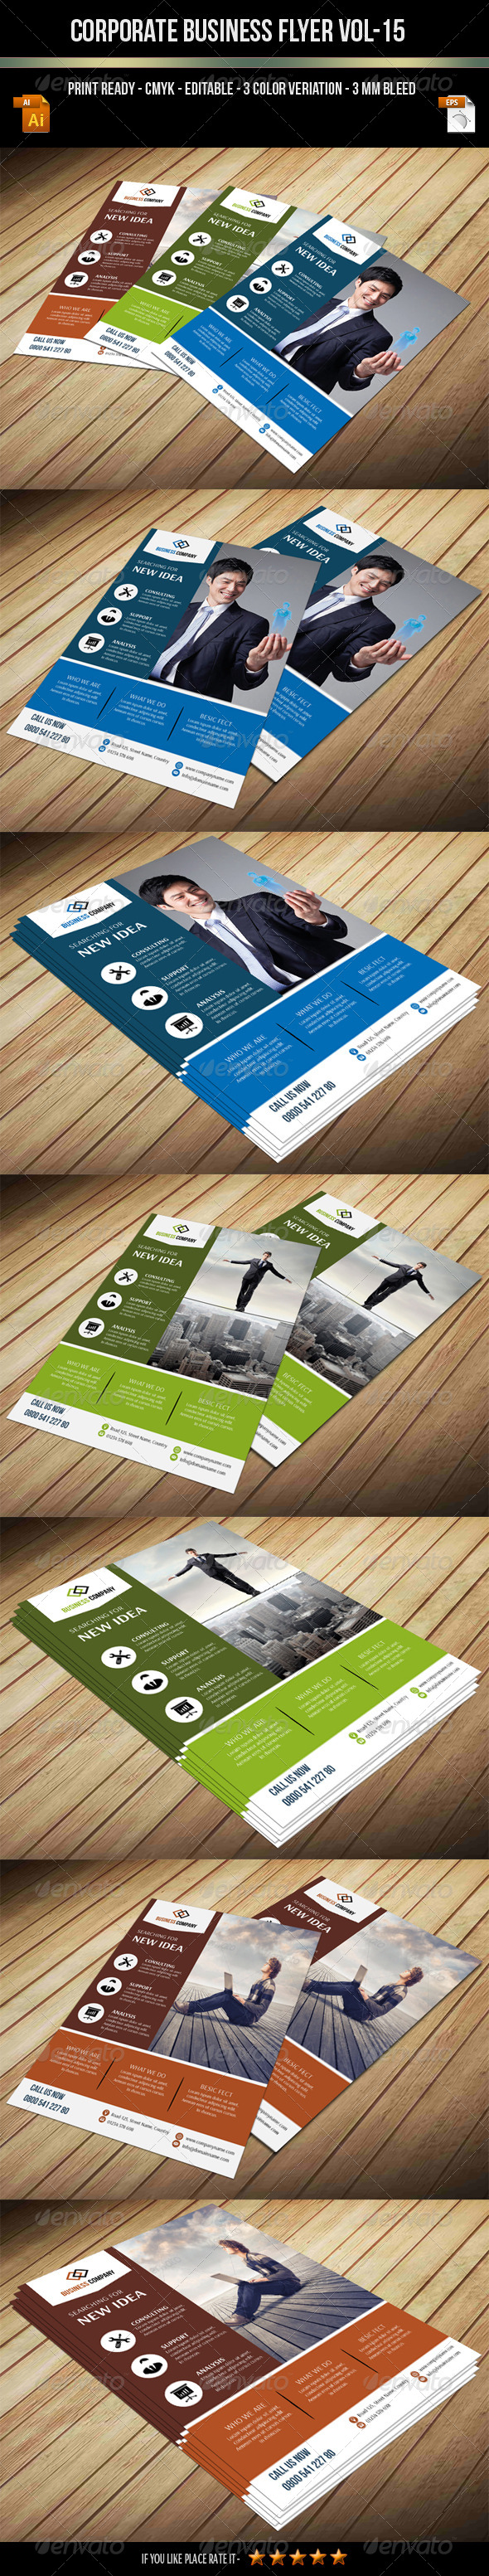 Corporate Business Flyer Vol-15